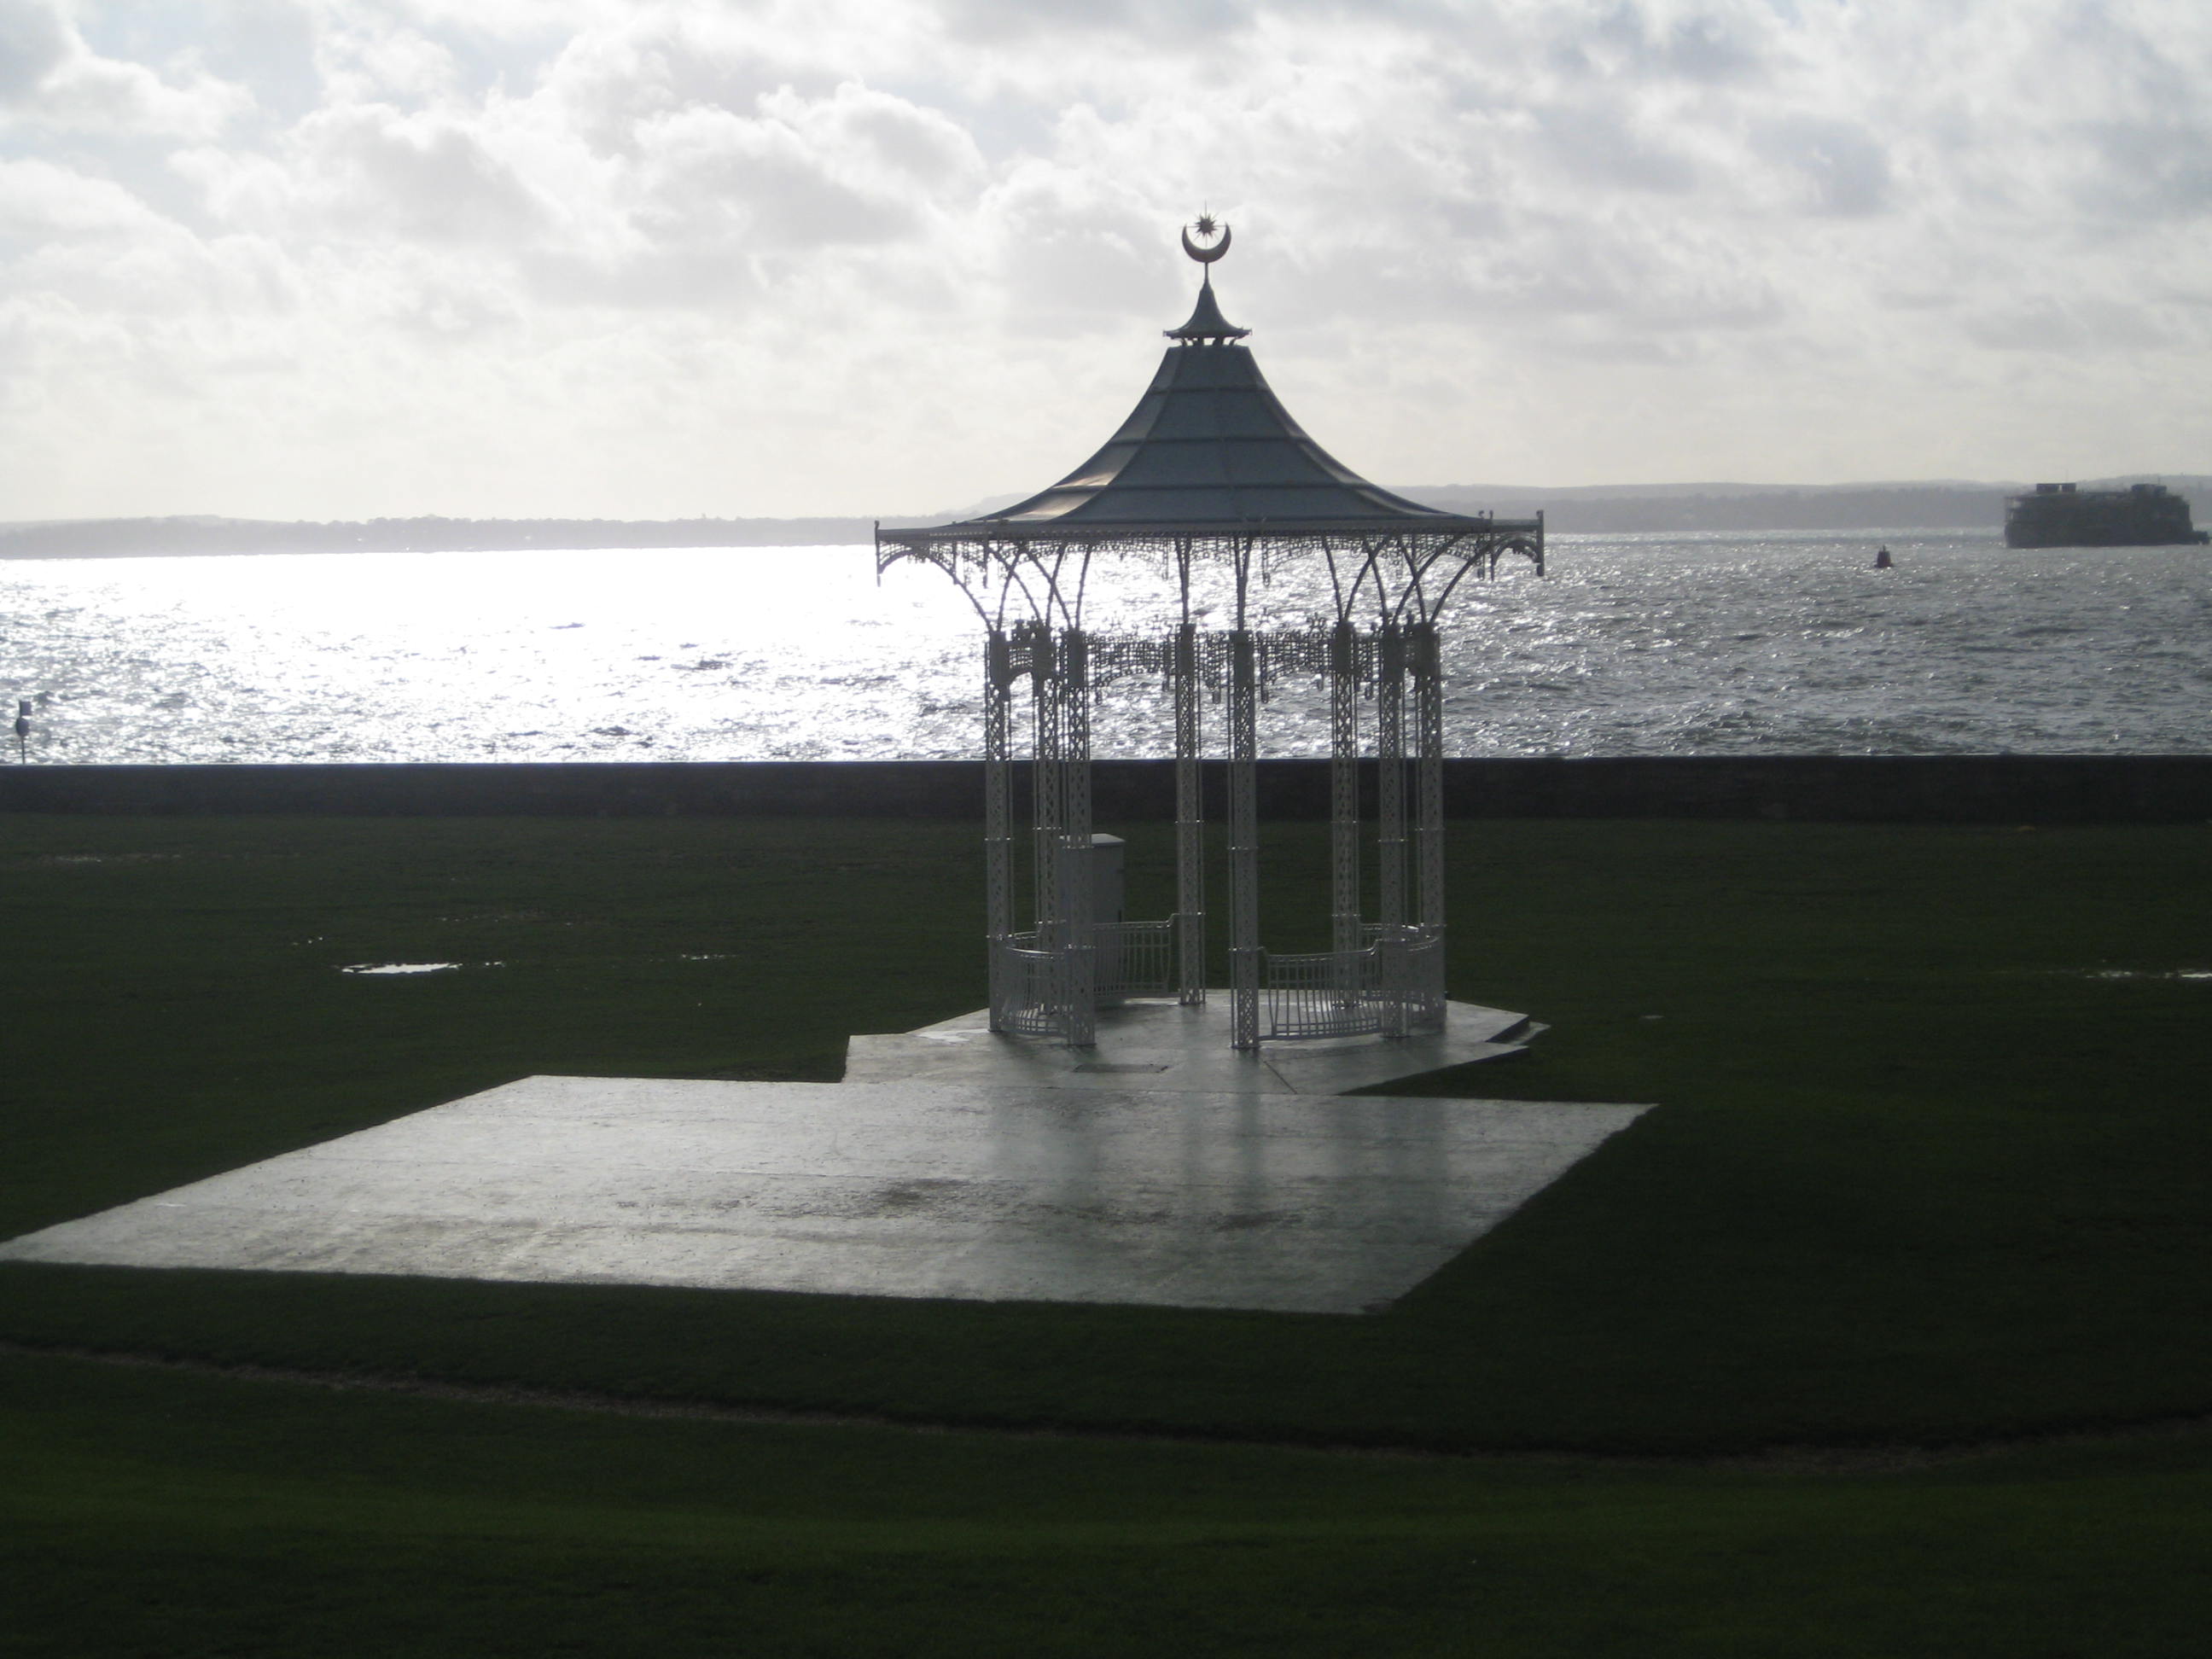 southsea bandstand